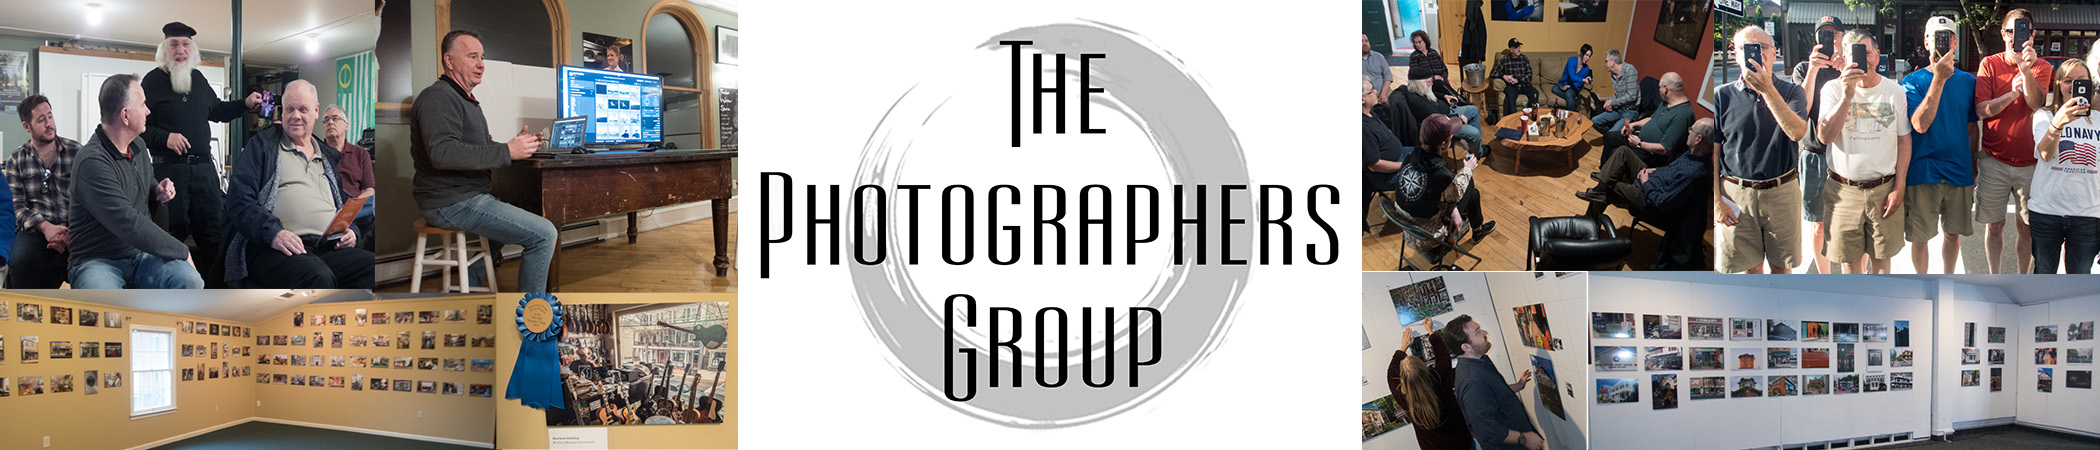 ABOUT THE PHOTOGRAPHERS GROUP